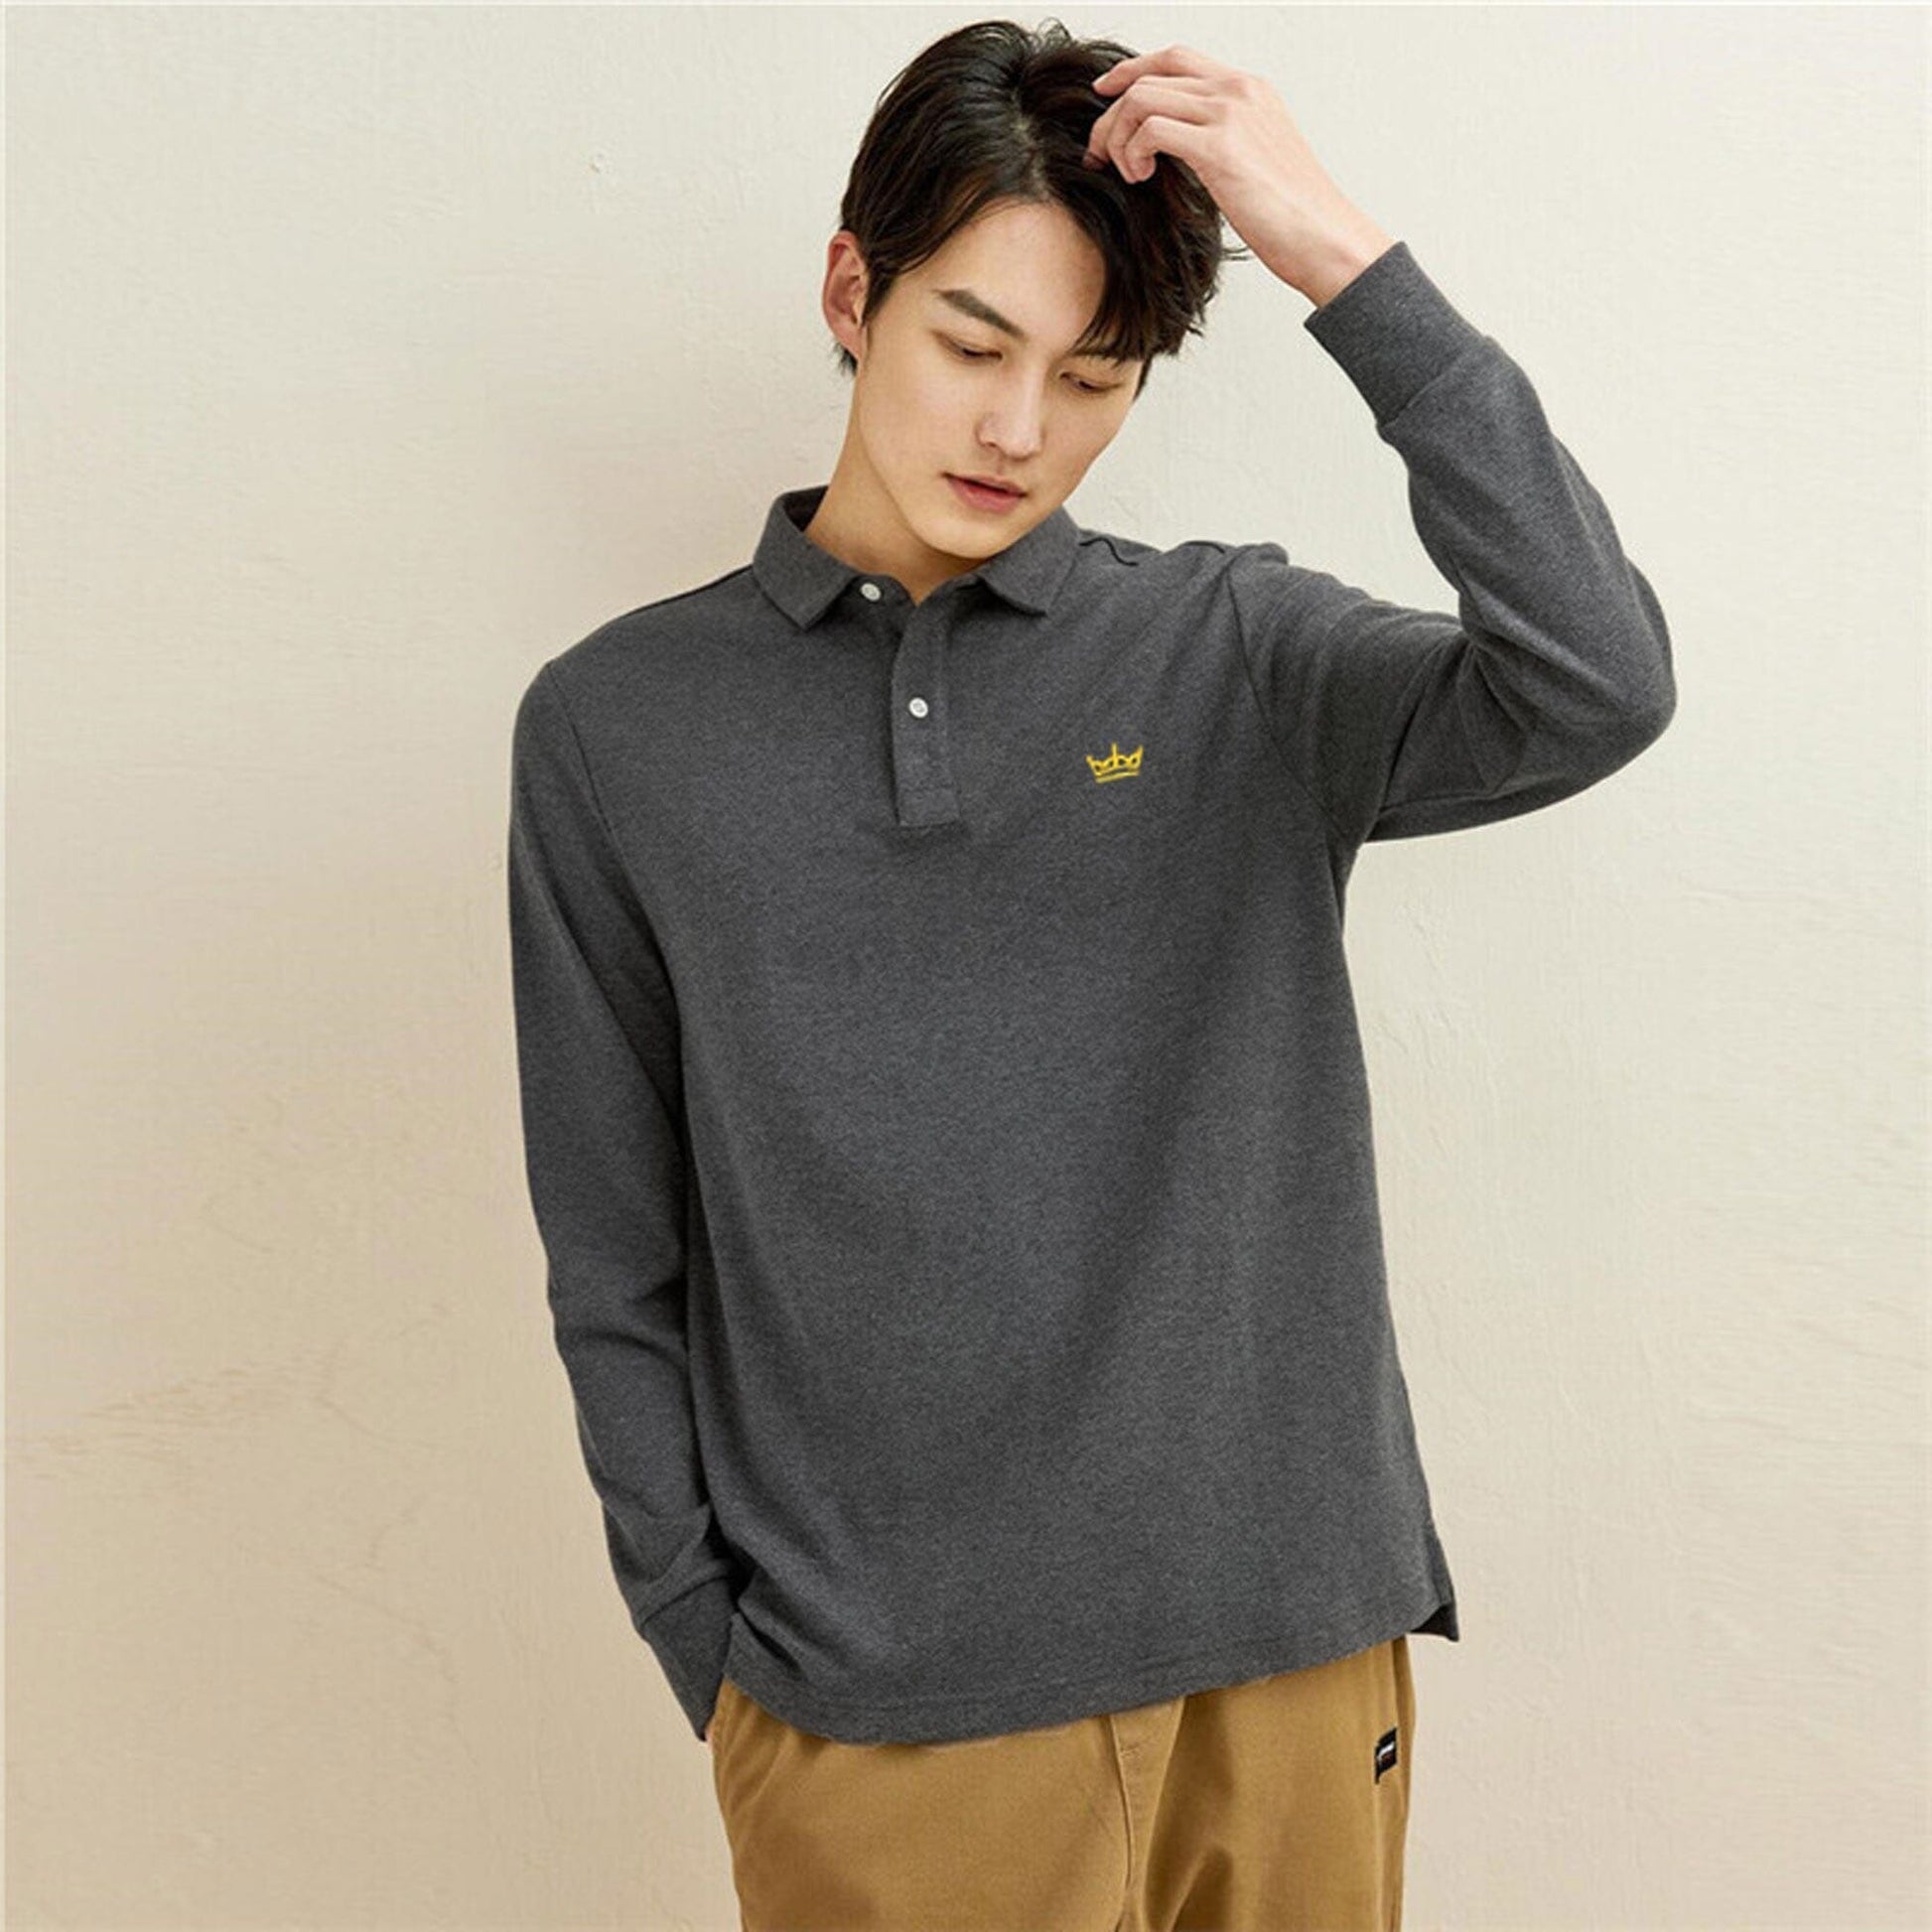 Industrialize Men's Crown Embroidered Long Sleeve Polo Shirt Men's Polo Shirt IST Charcoal 2XS 